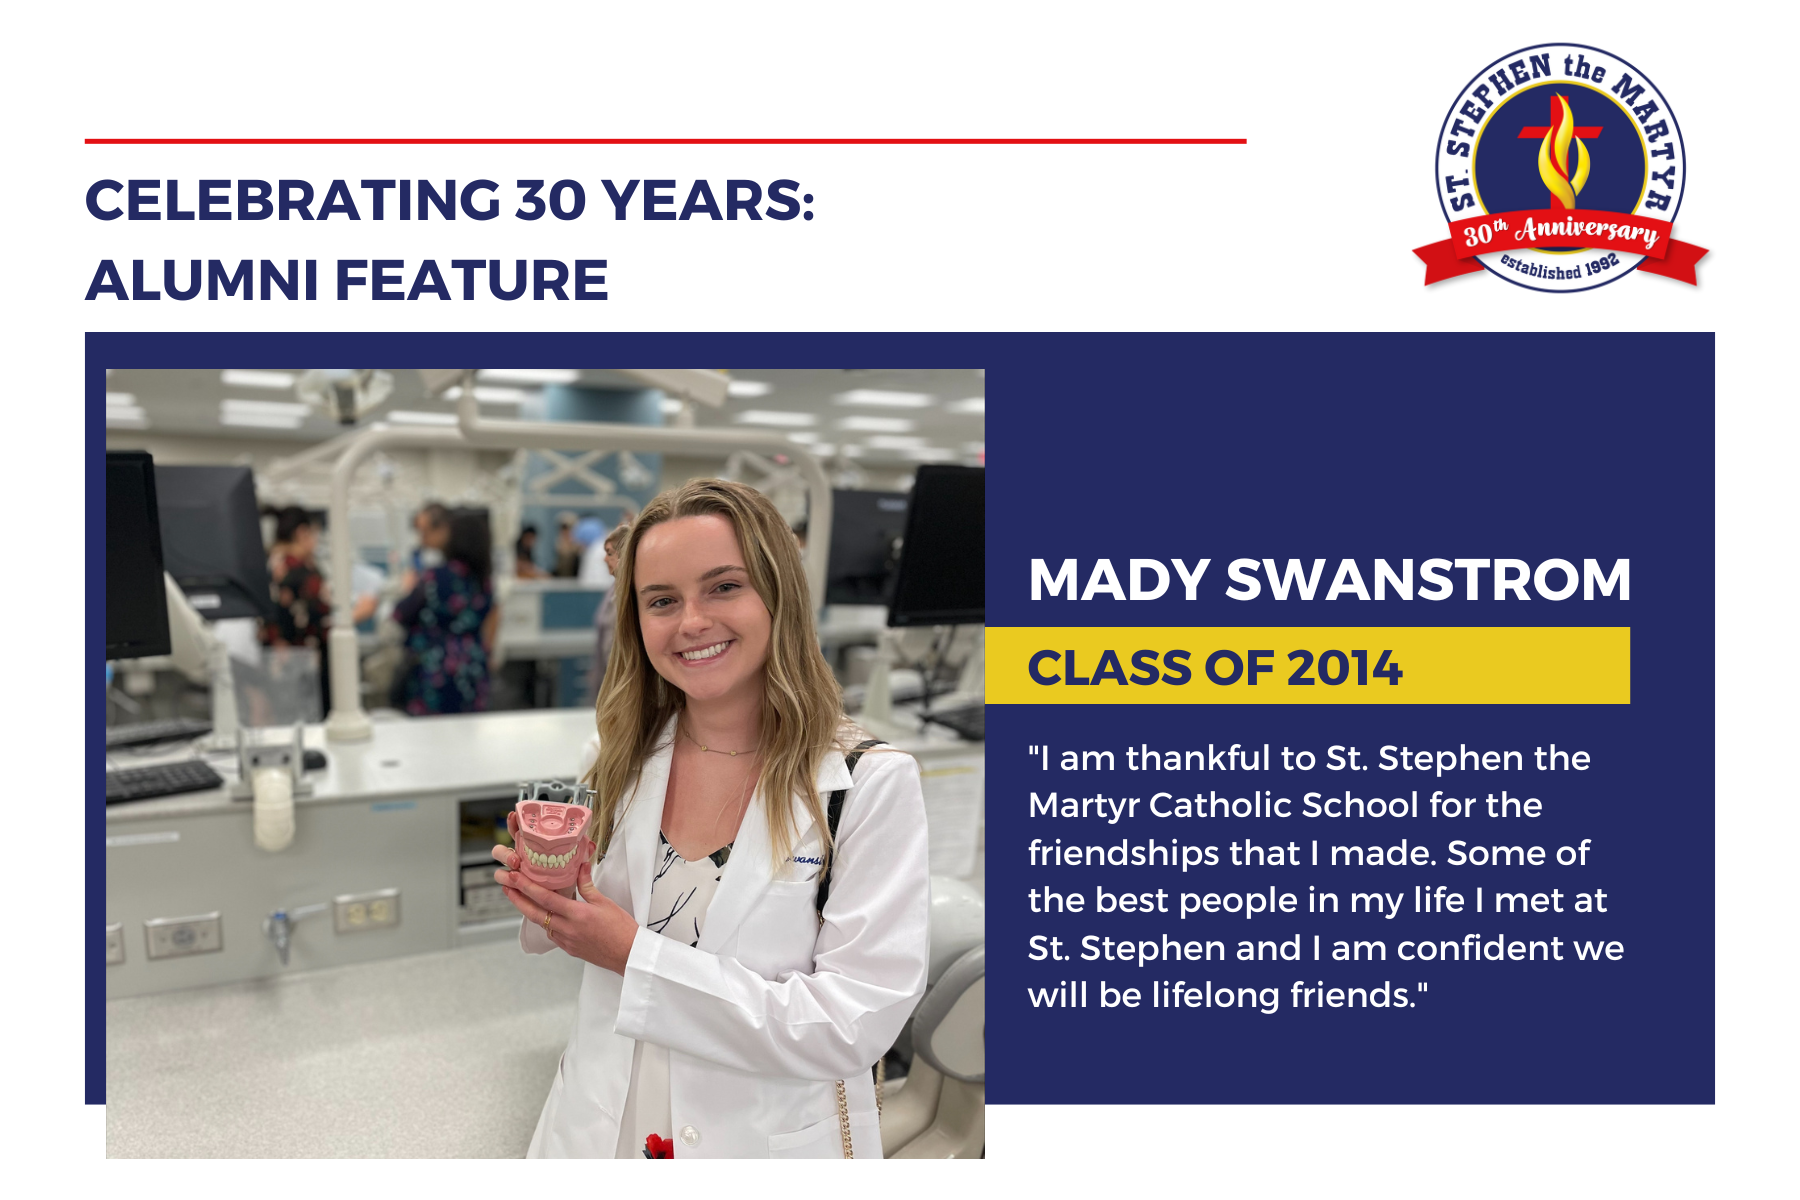 Alumni Feature: Mady Swanstrom, Class of 2014